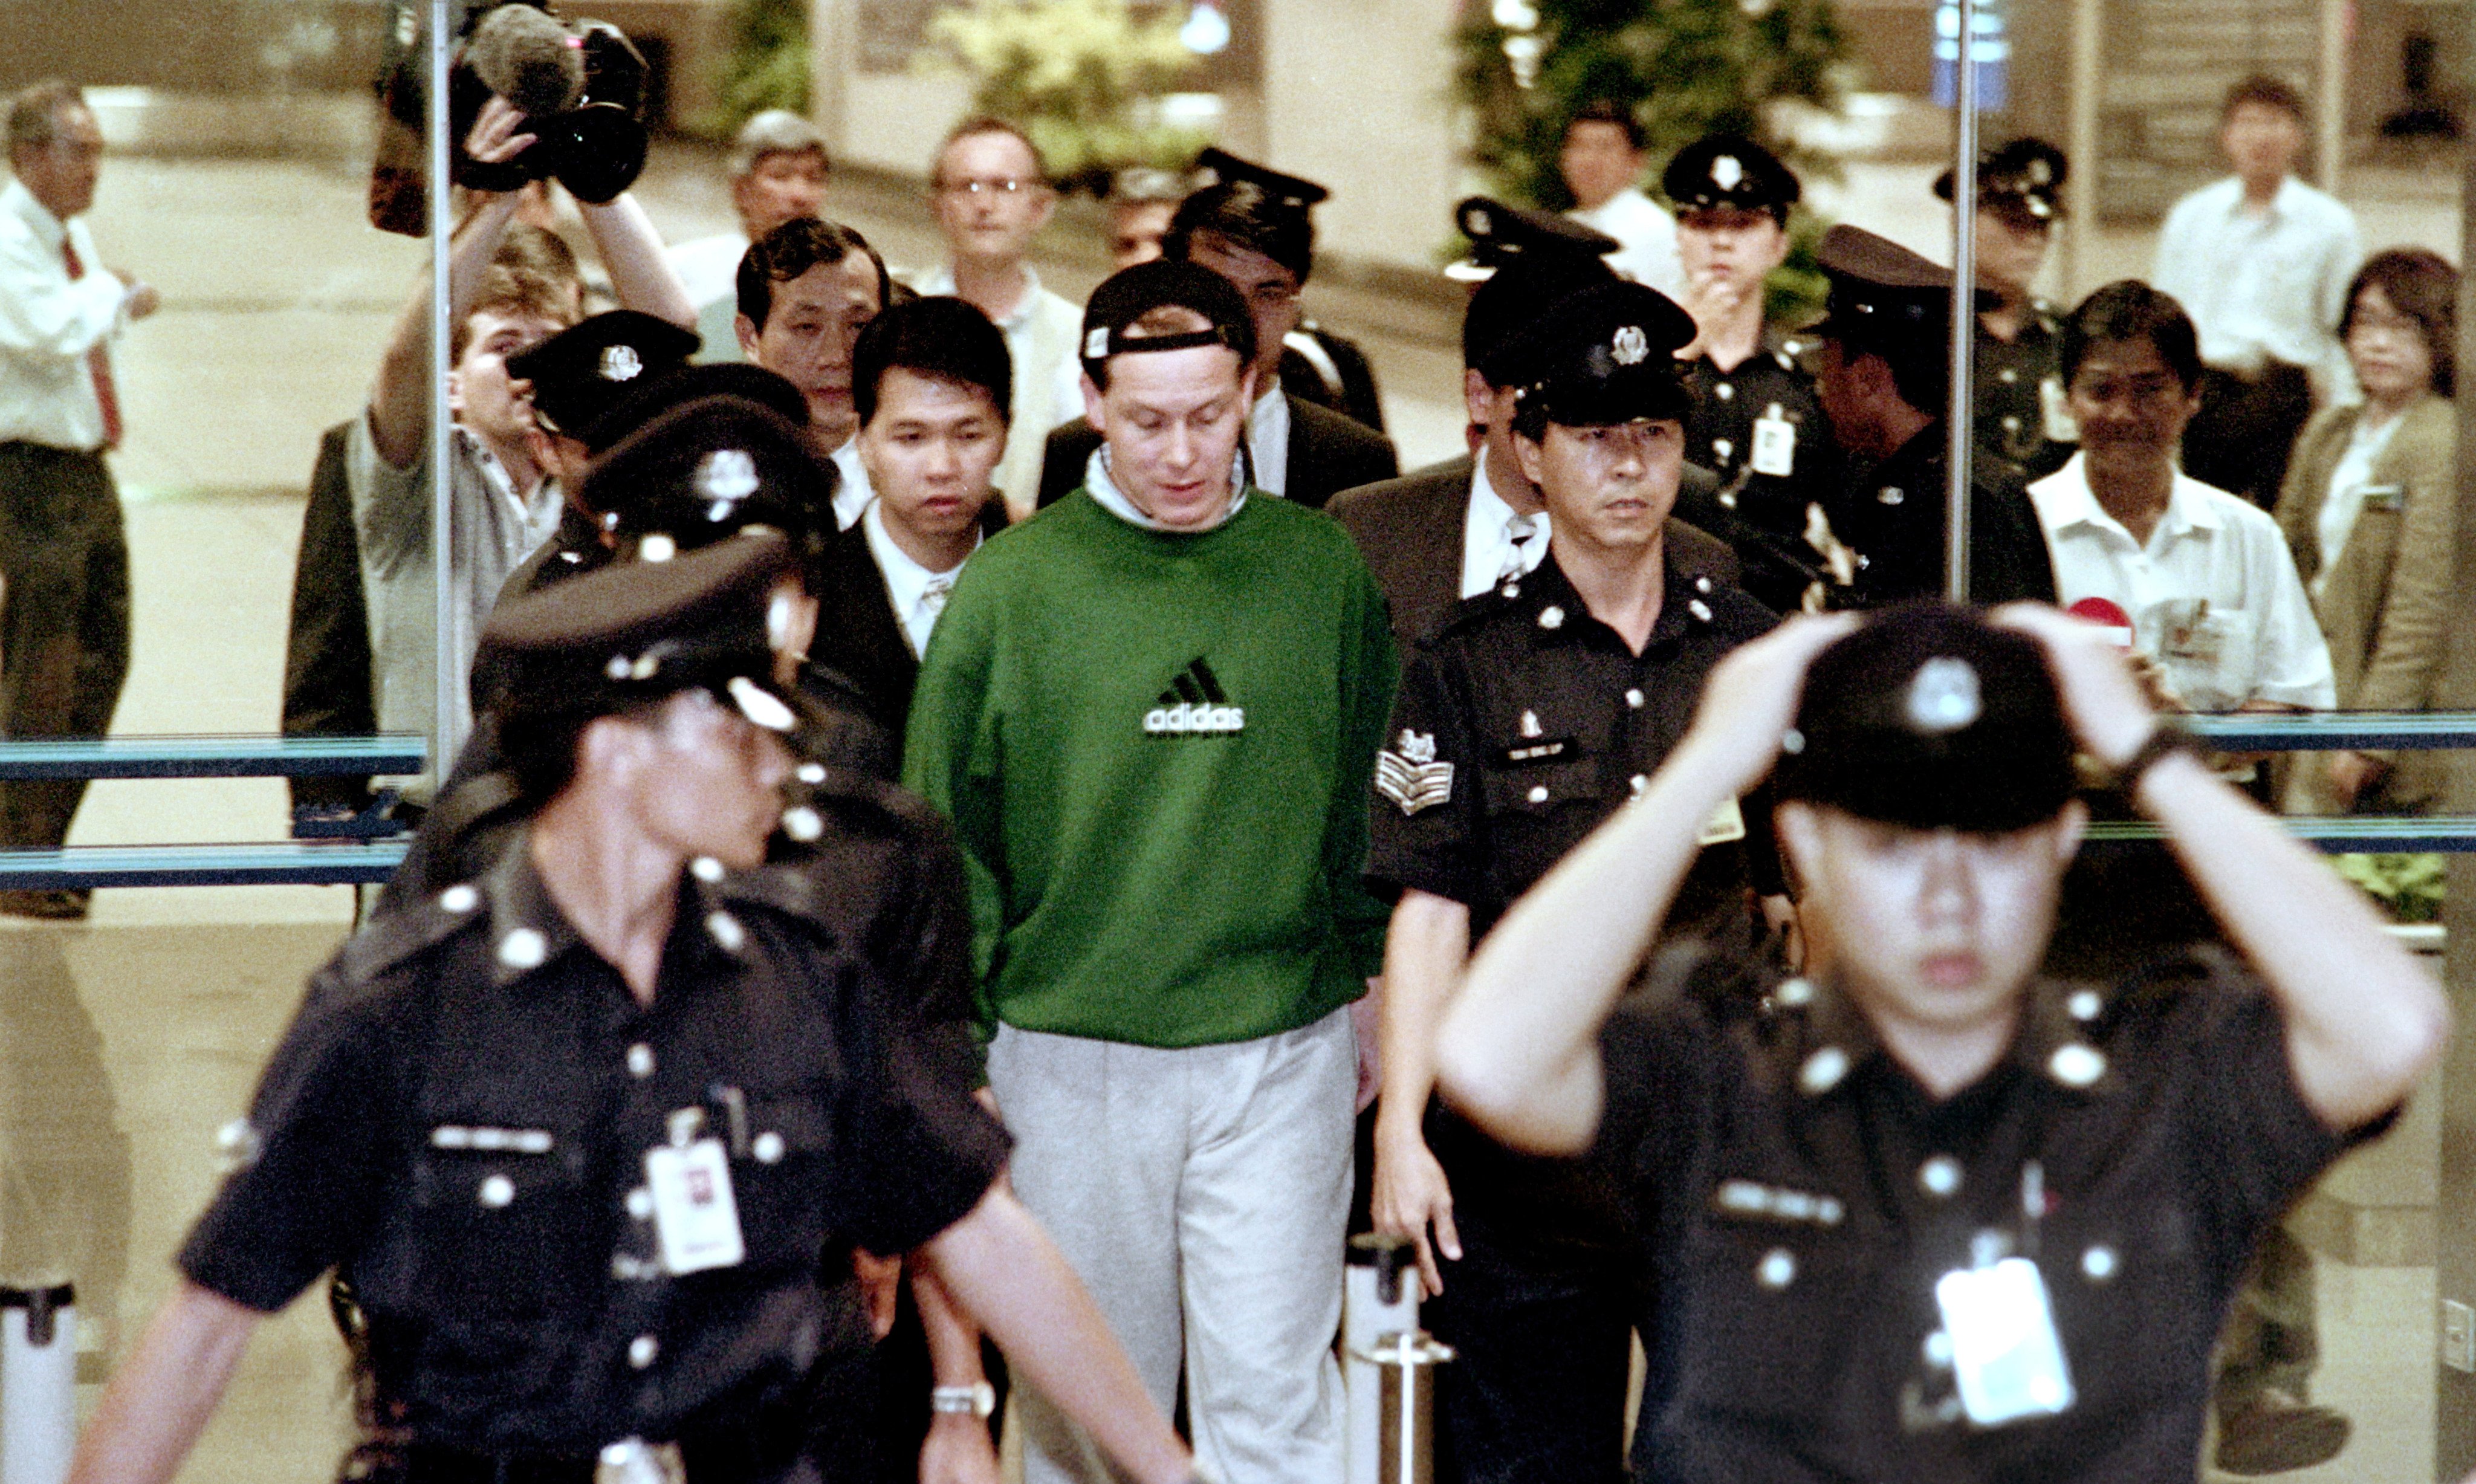 Rogue trader Nick Leeson arrives at Singapore’s Changi airport on November 23, 1995, after being expelled by Germany to stand trial on charges of fraud and forgery over the collapse of Barings Bank, Britain’s oldest merchant bank. Photo: AFP